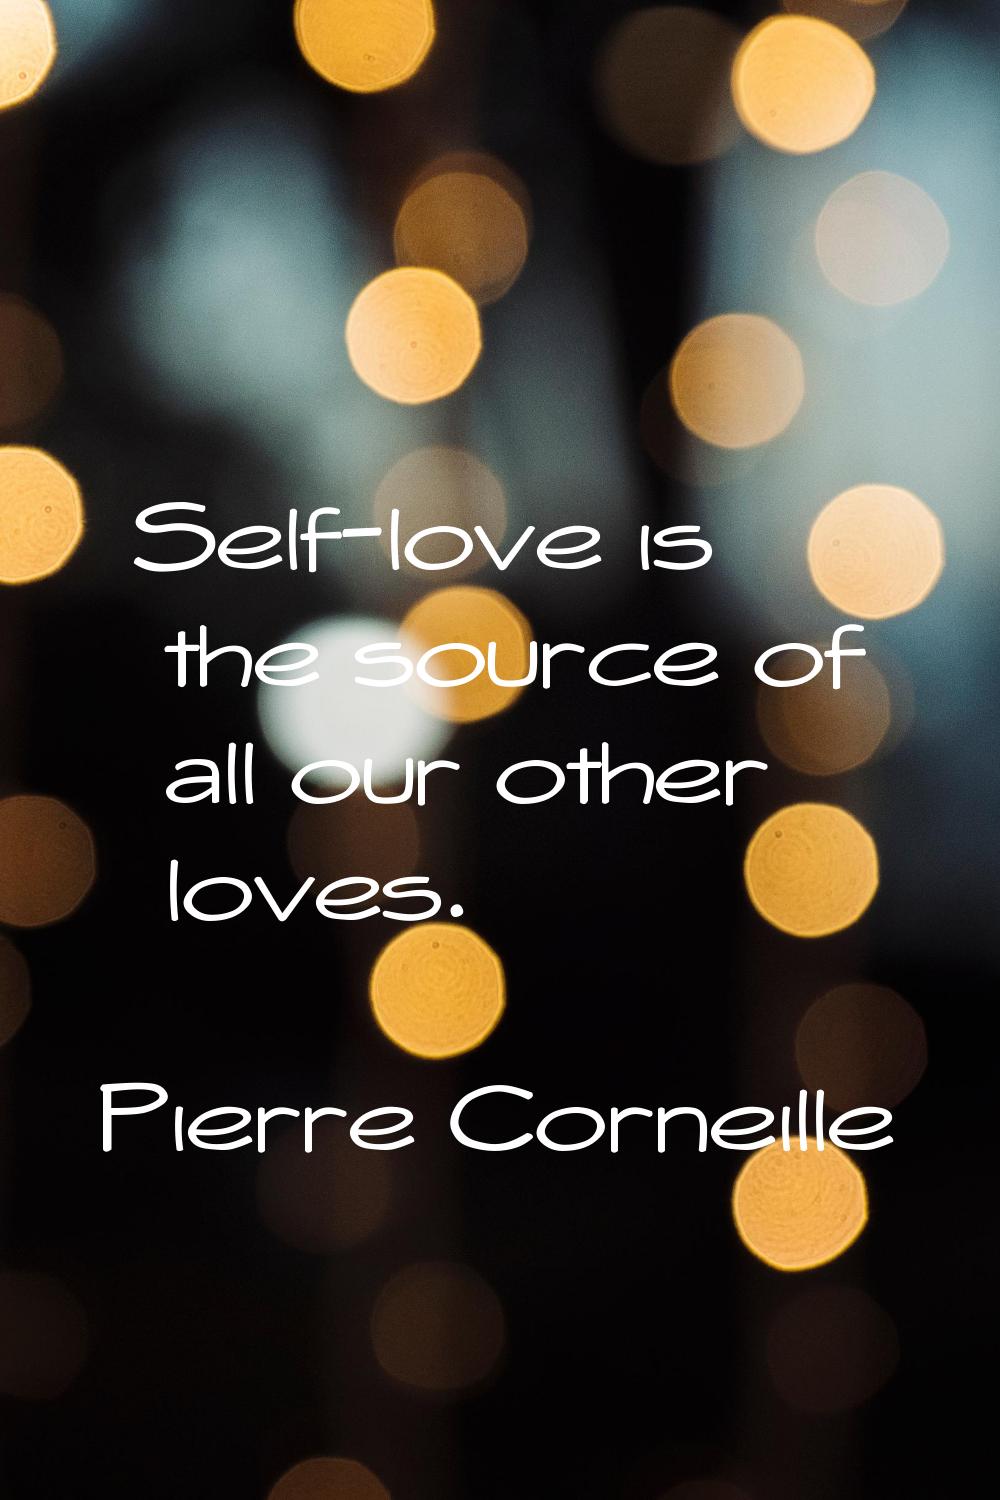 Self-love is the source of all our other loves.